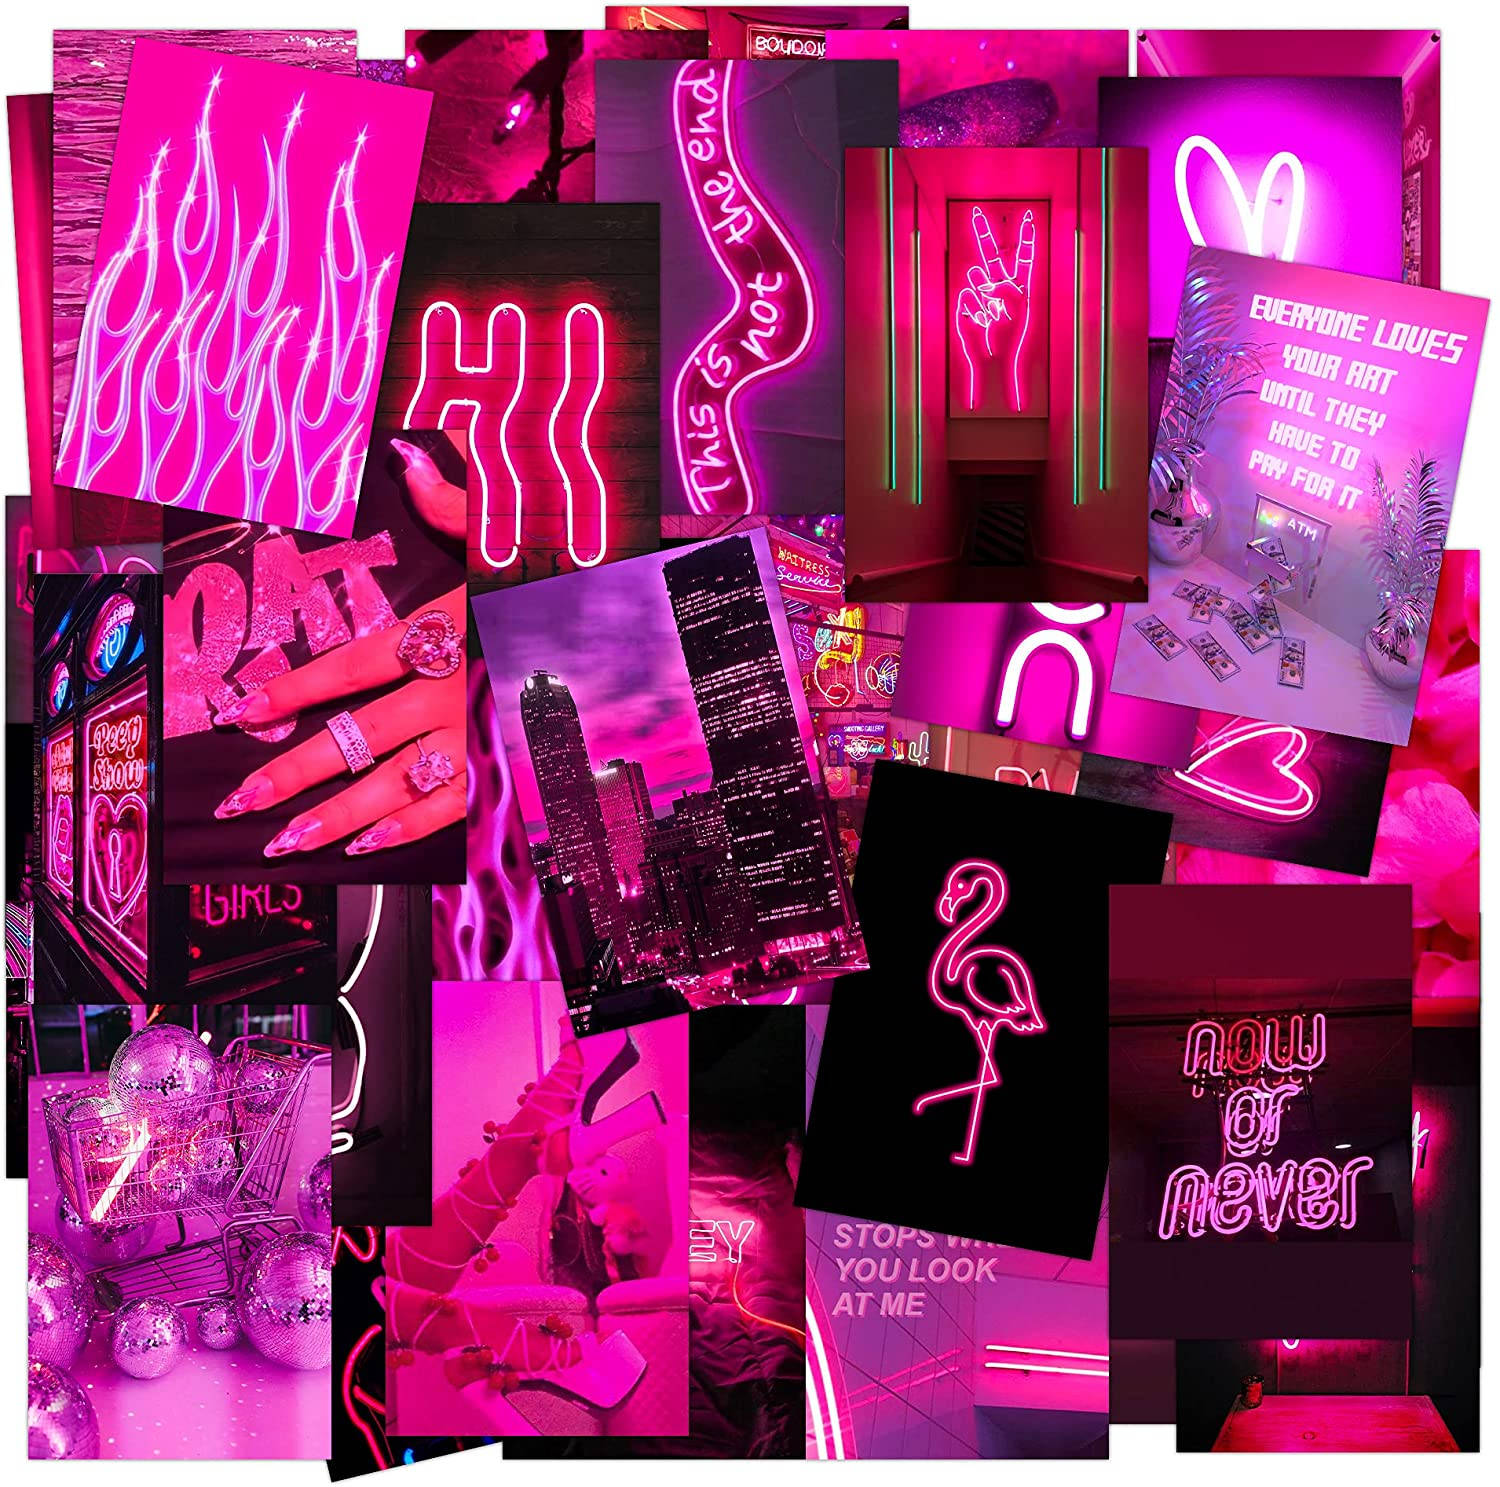 Download Messy Collage Of Neon Pink Photos Wallpaper | Wallpapers.com